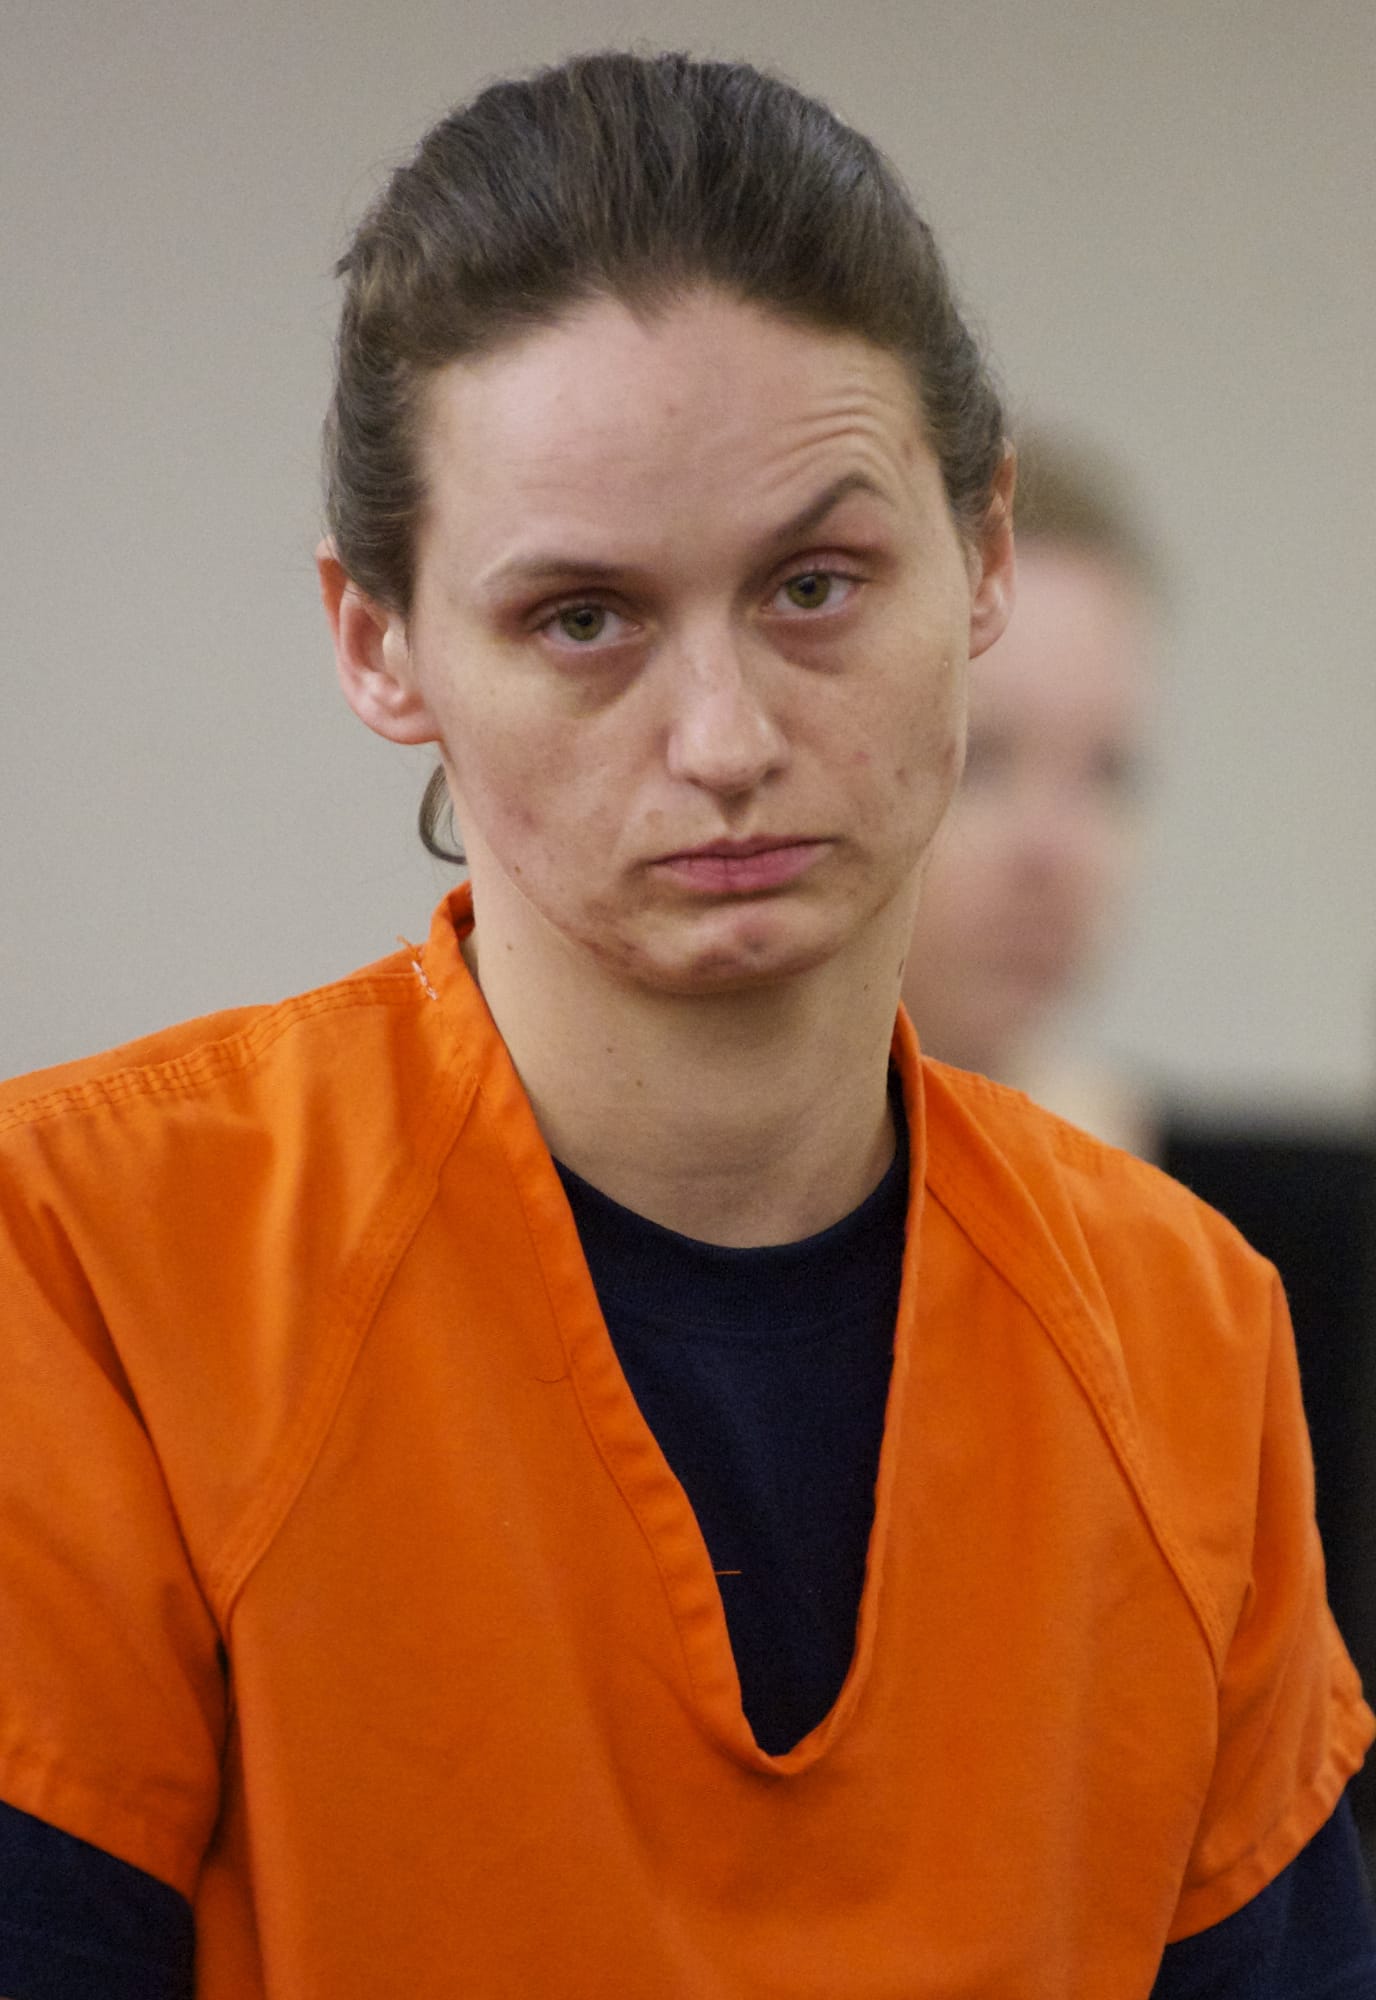 Jessica VanWechel, 30, of Camas is arraigned March 13 on charges of vehicular homicide and hit and run in the death of Stephen Dewey, 65, of Vancouver.